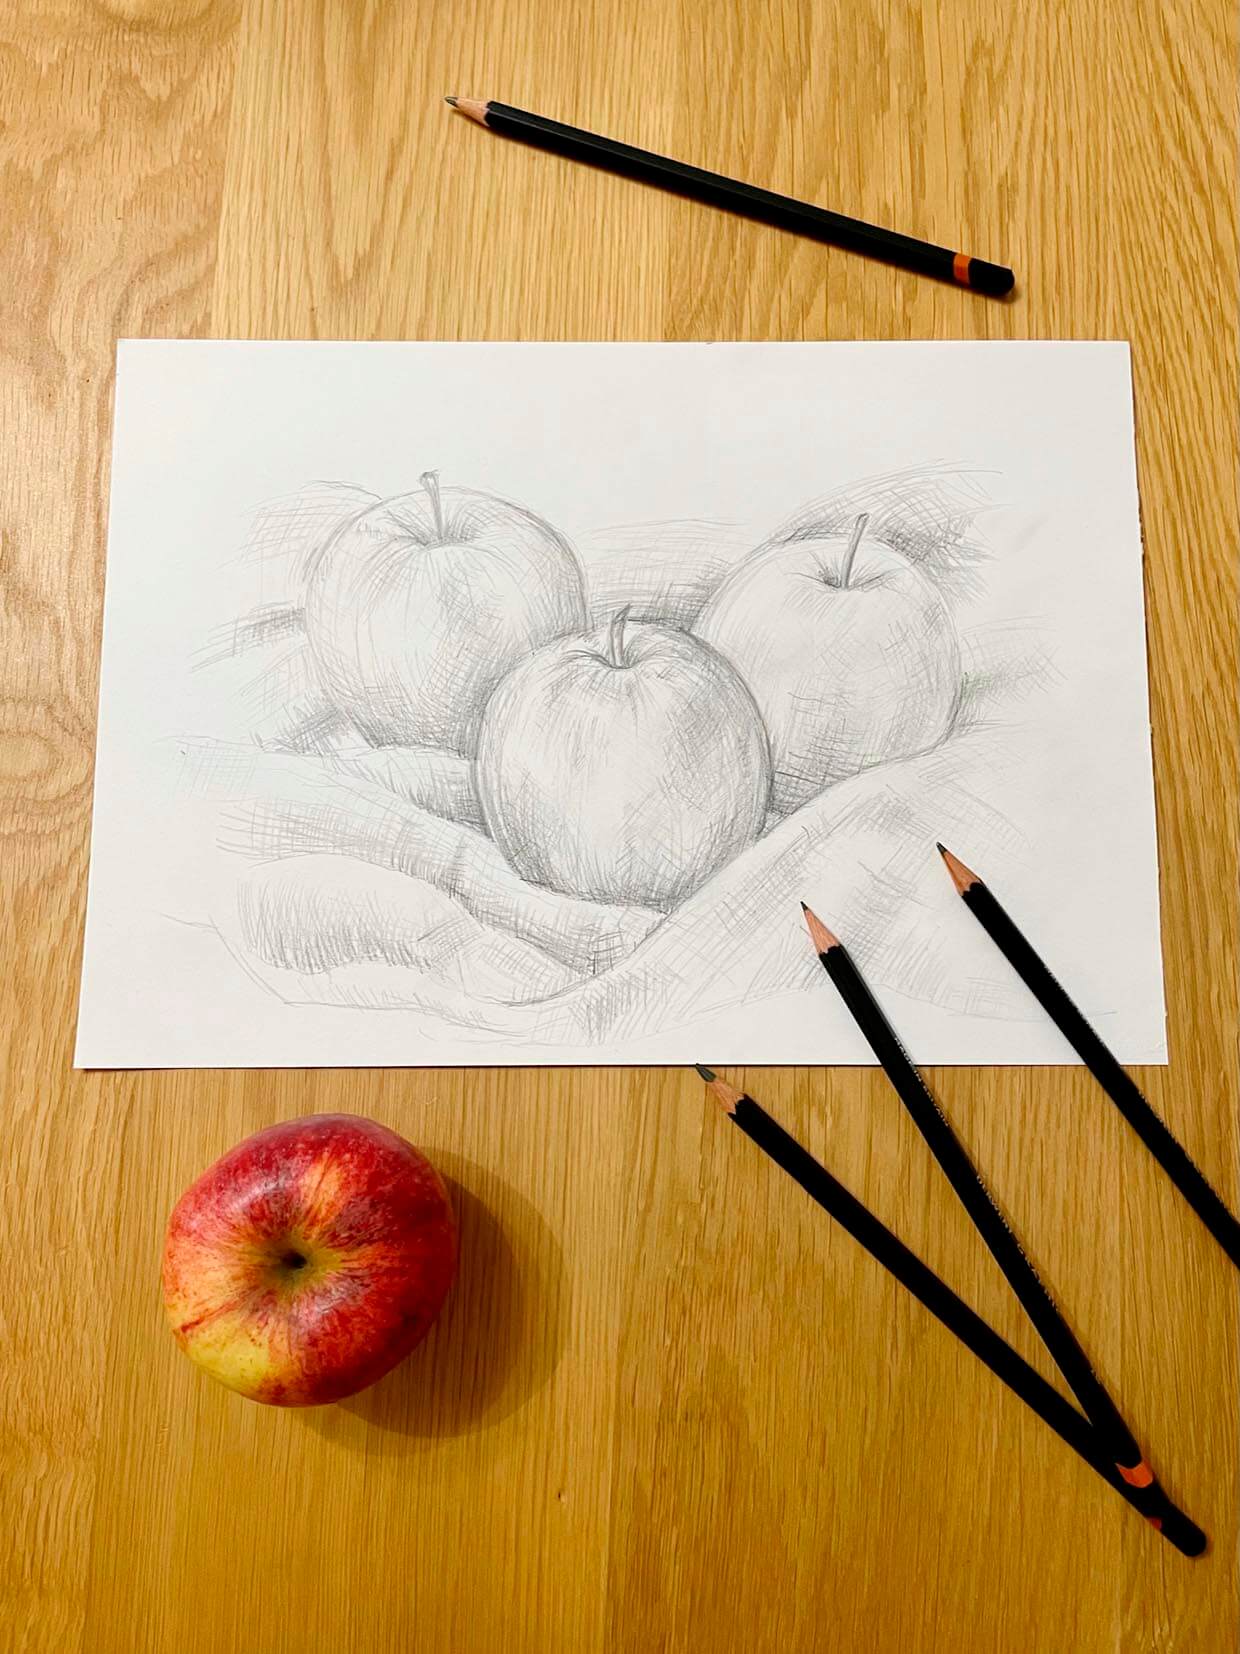 Create stunning textured drawings with cross hatching - Gathered